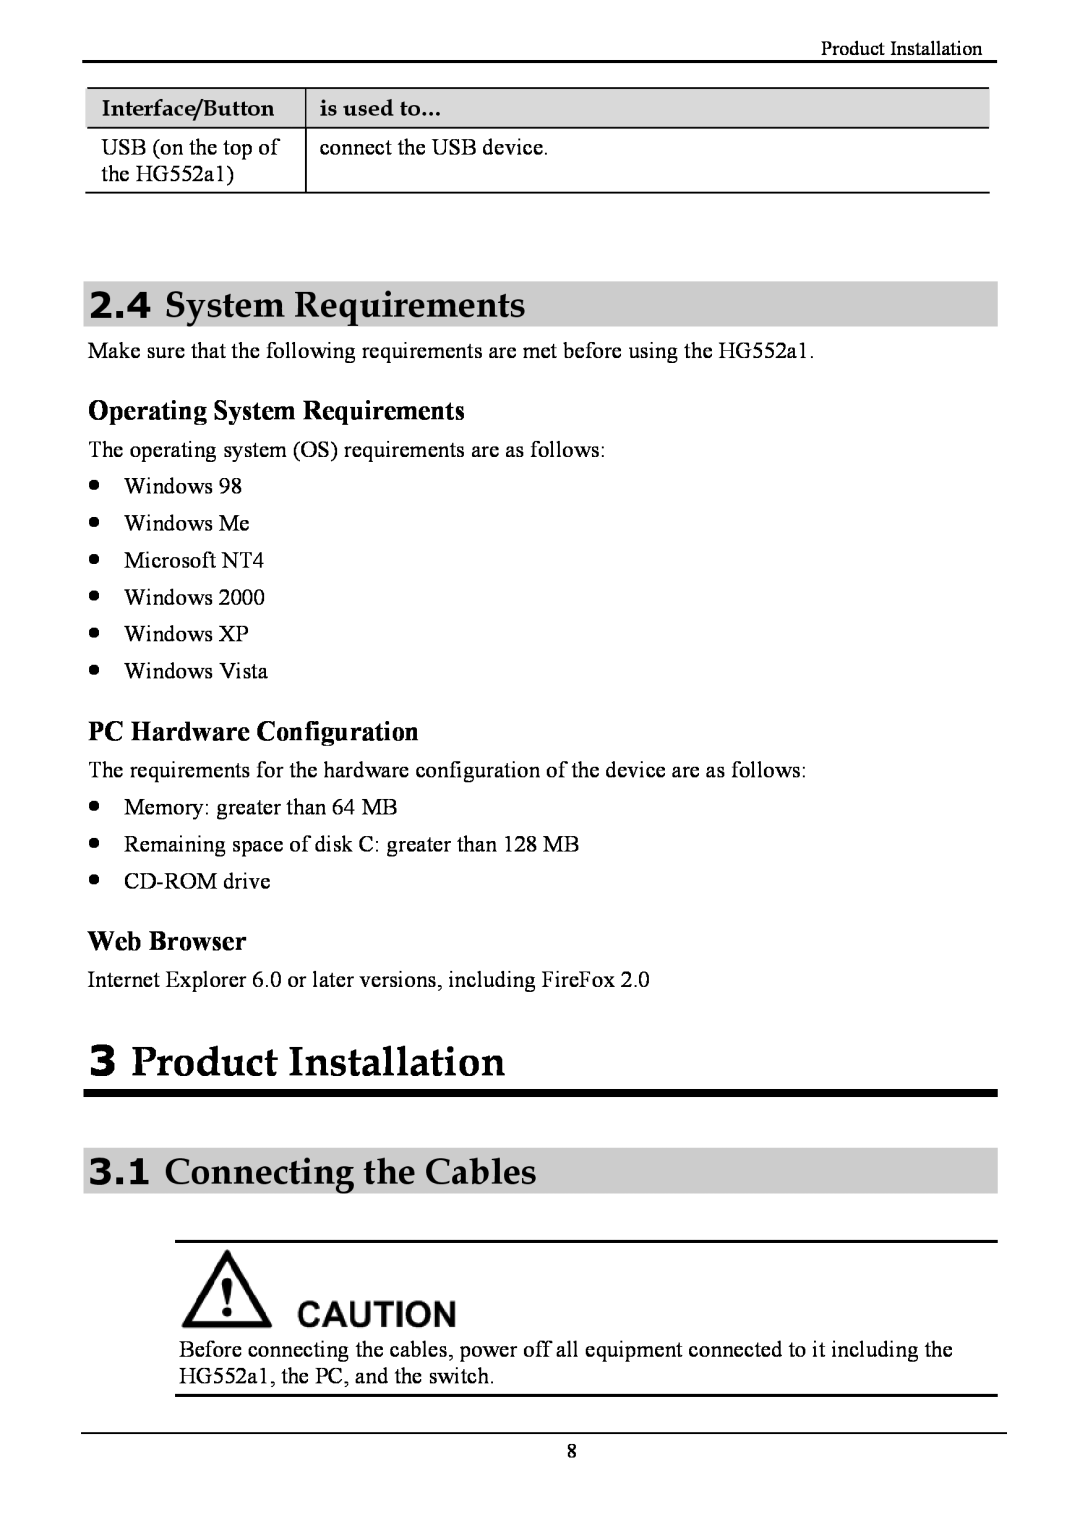 Huawei HG552a1 Product Installation, Connecting the Cables, Operating System Requirements, PC Hardware Configuration 